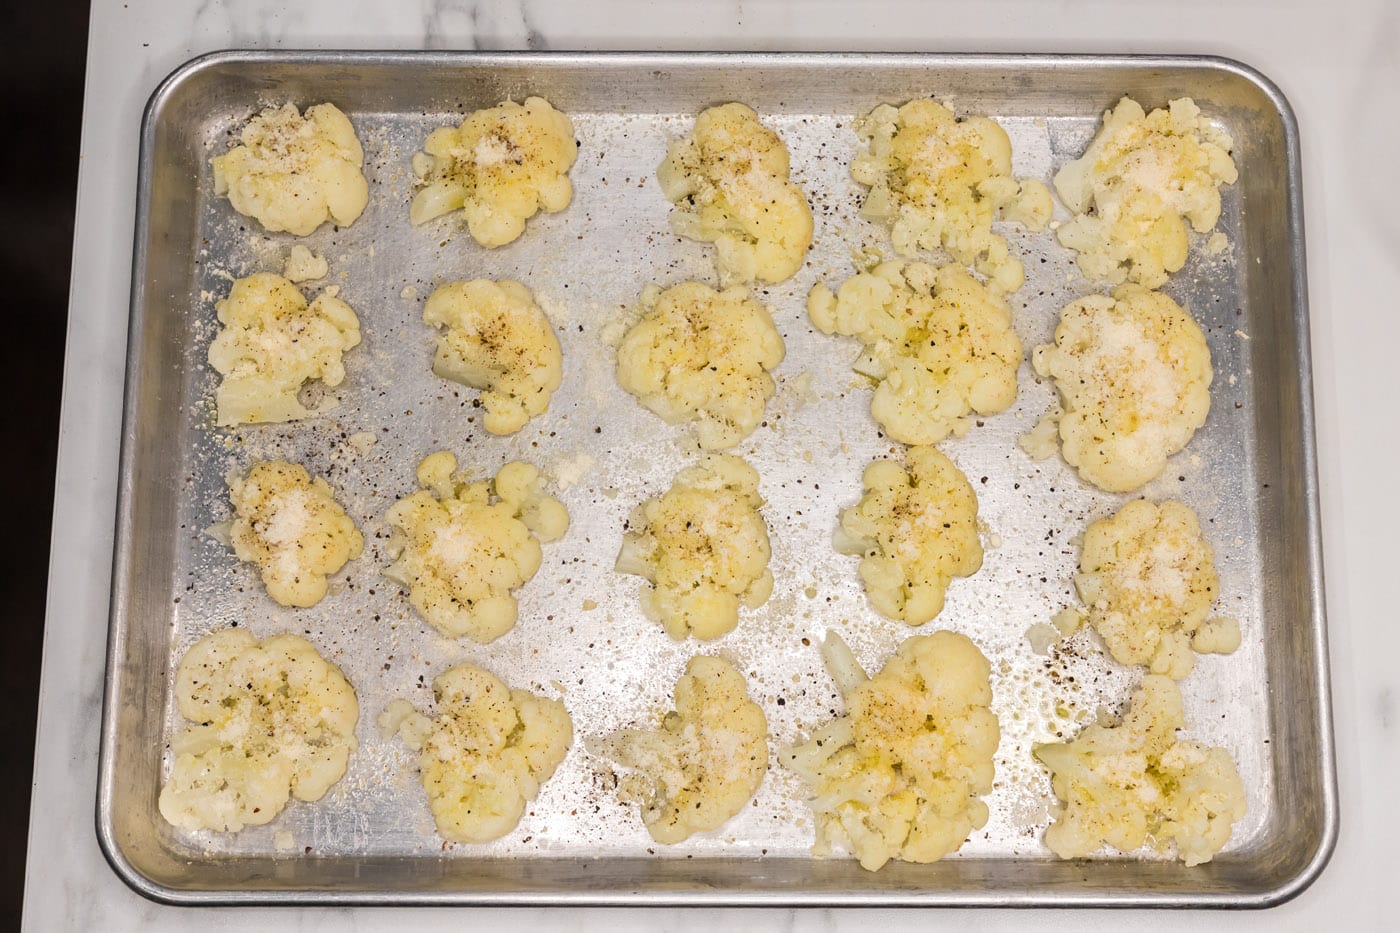 smashed cauliflower with parmesan cheese and seasonings